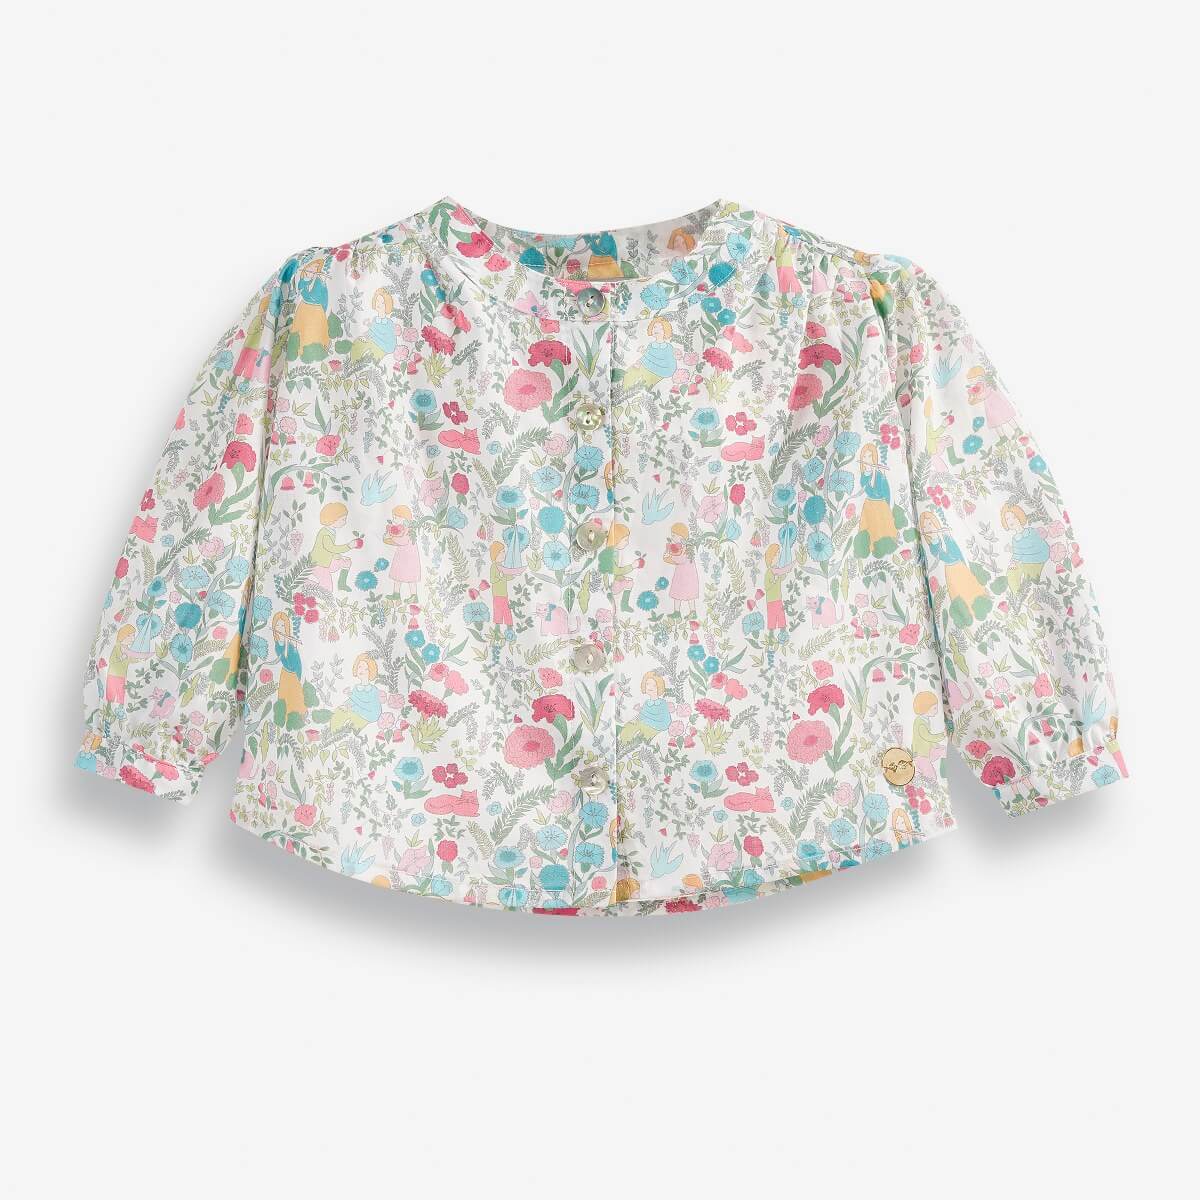 Baby Girls' Shirt with Puffed Sleeves and an All-Over Floral Print